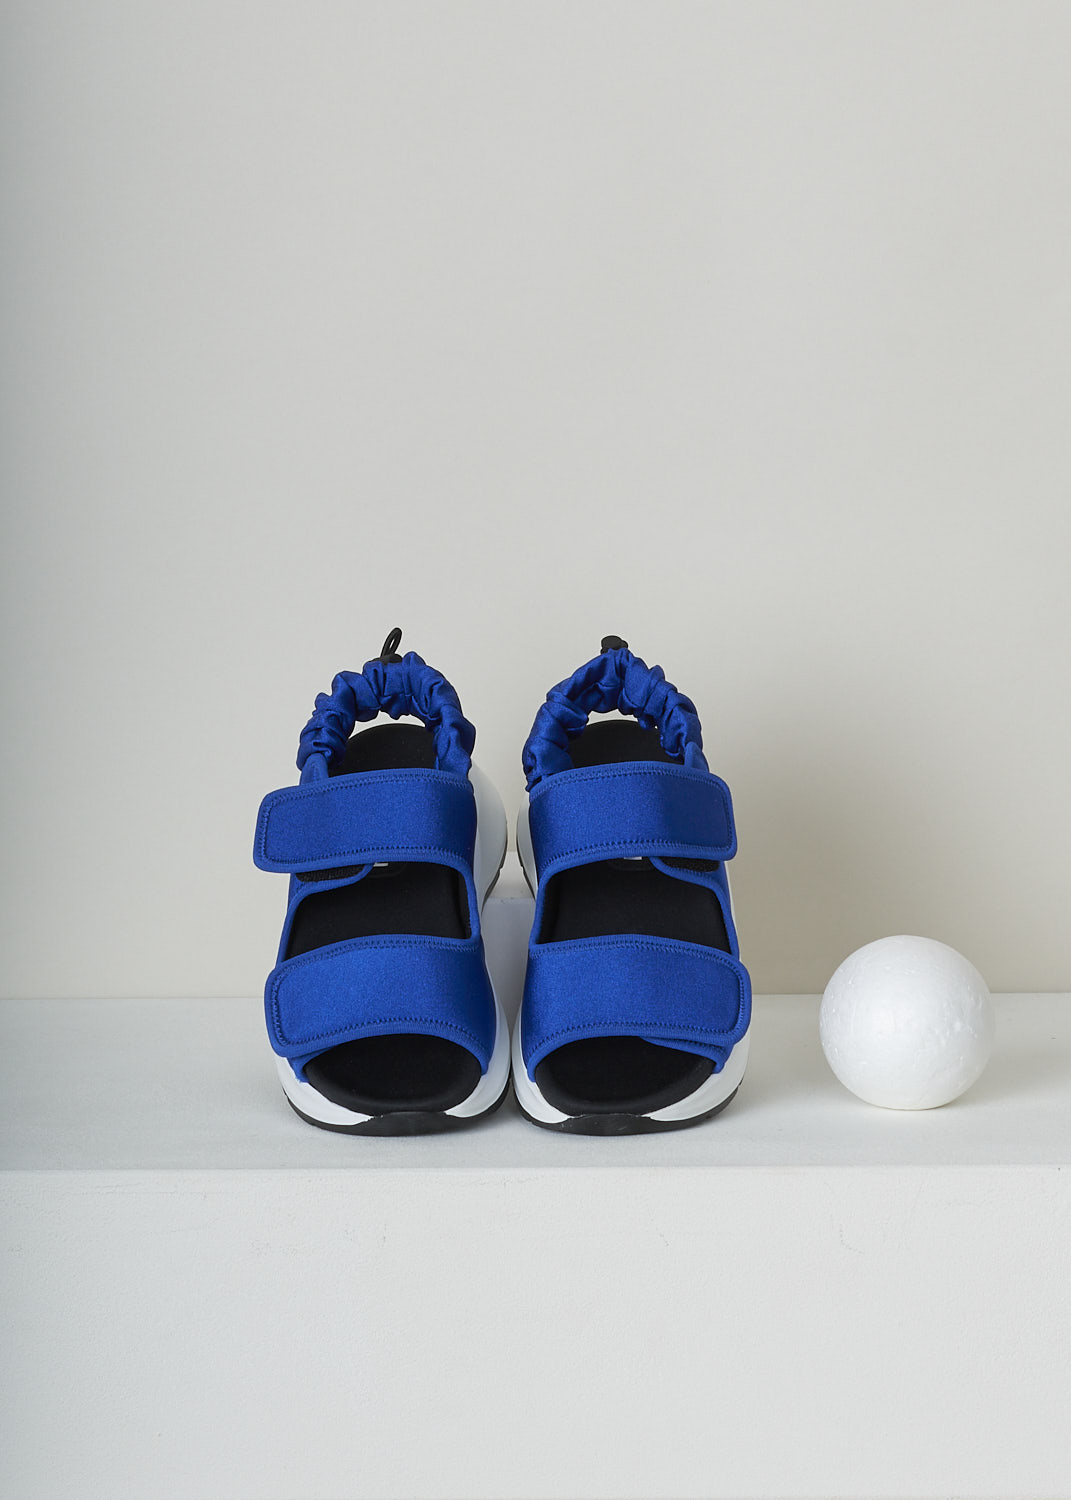 HOGAN, ROYAL BLUE CHUNKY SANDAL, HXW5980EB40R80U615_H598_SANDALO_R80, Top, Side, These royal blue open toe sandals feature a double strap with Velcro across the vamp and toe and an elasticated slingback strap with a pull tab along the ankle. The sandals have a chunky sole in contrasting white. 
